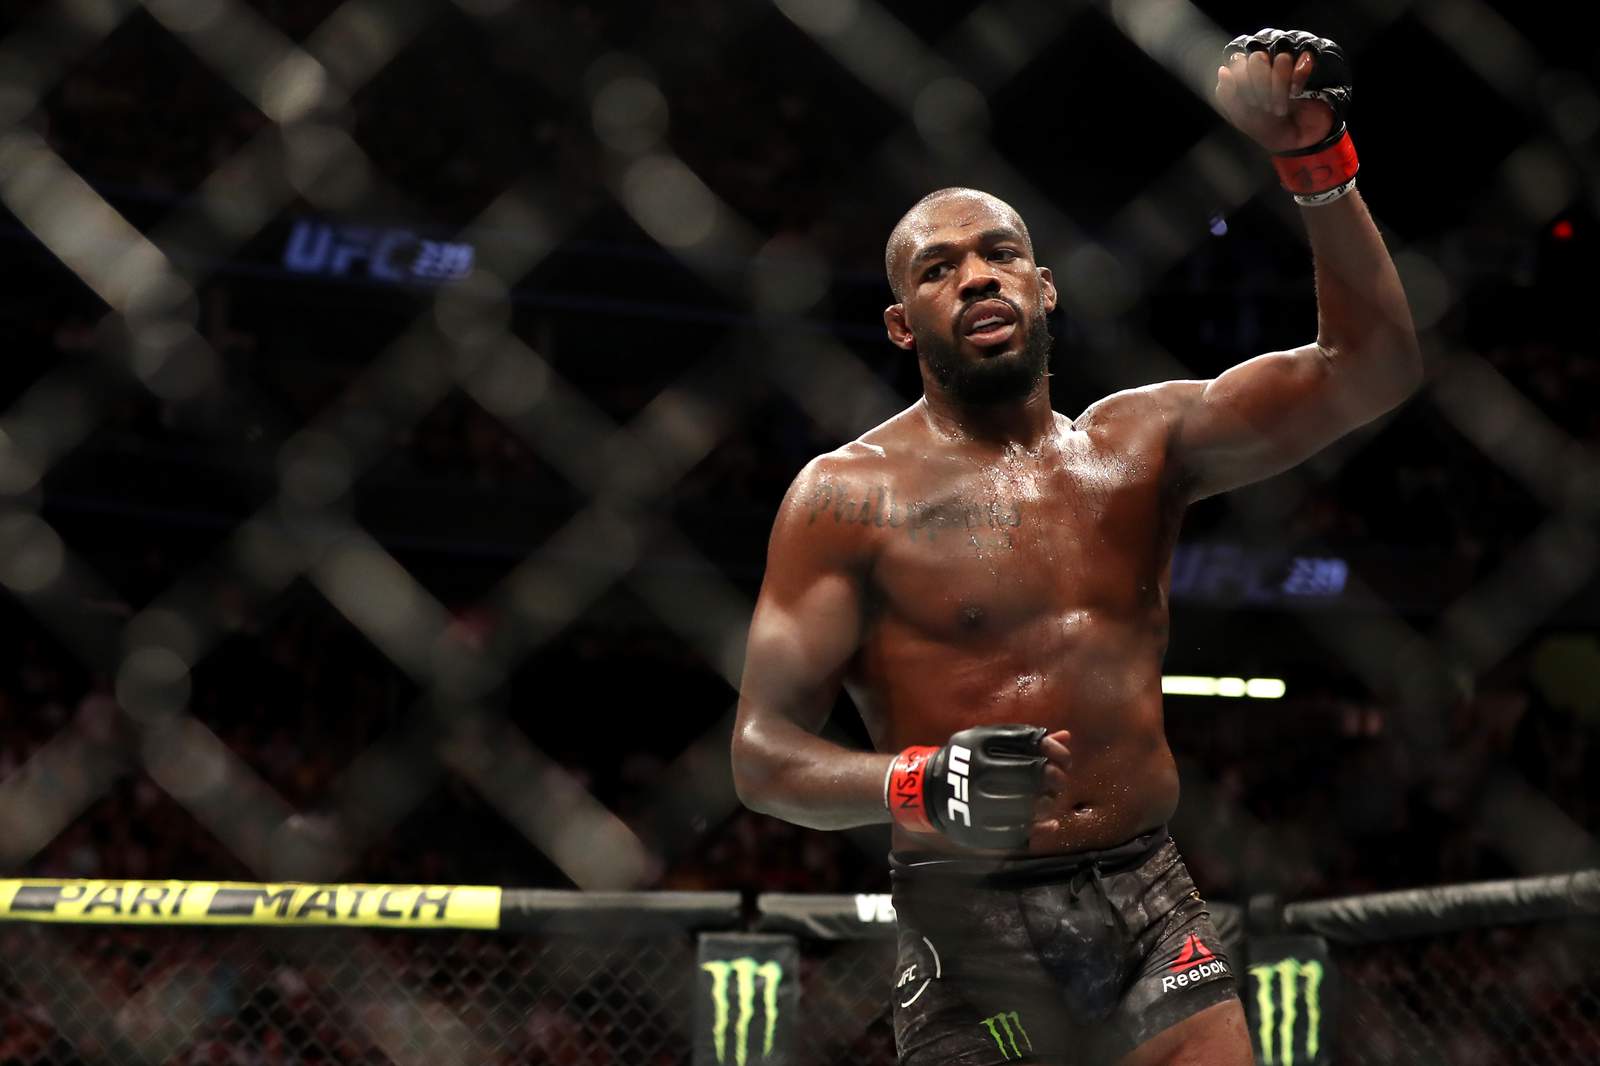 World’s top fighters prepare for showdown at UFC 247 at the Toyota Center